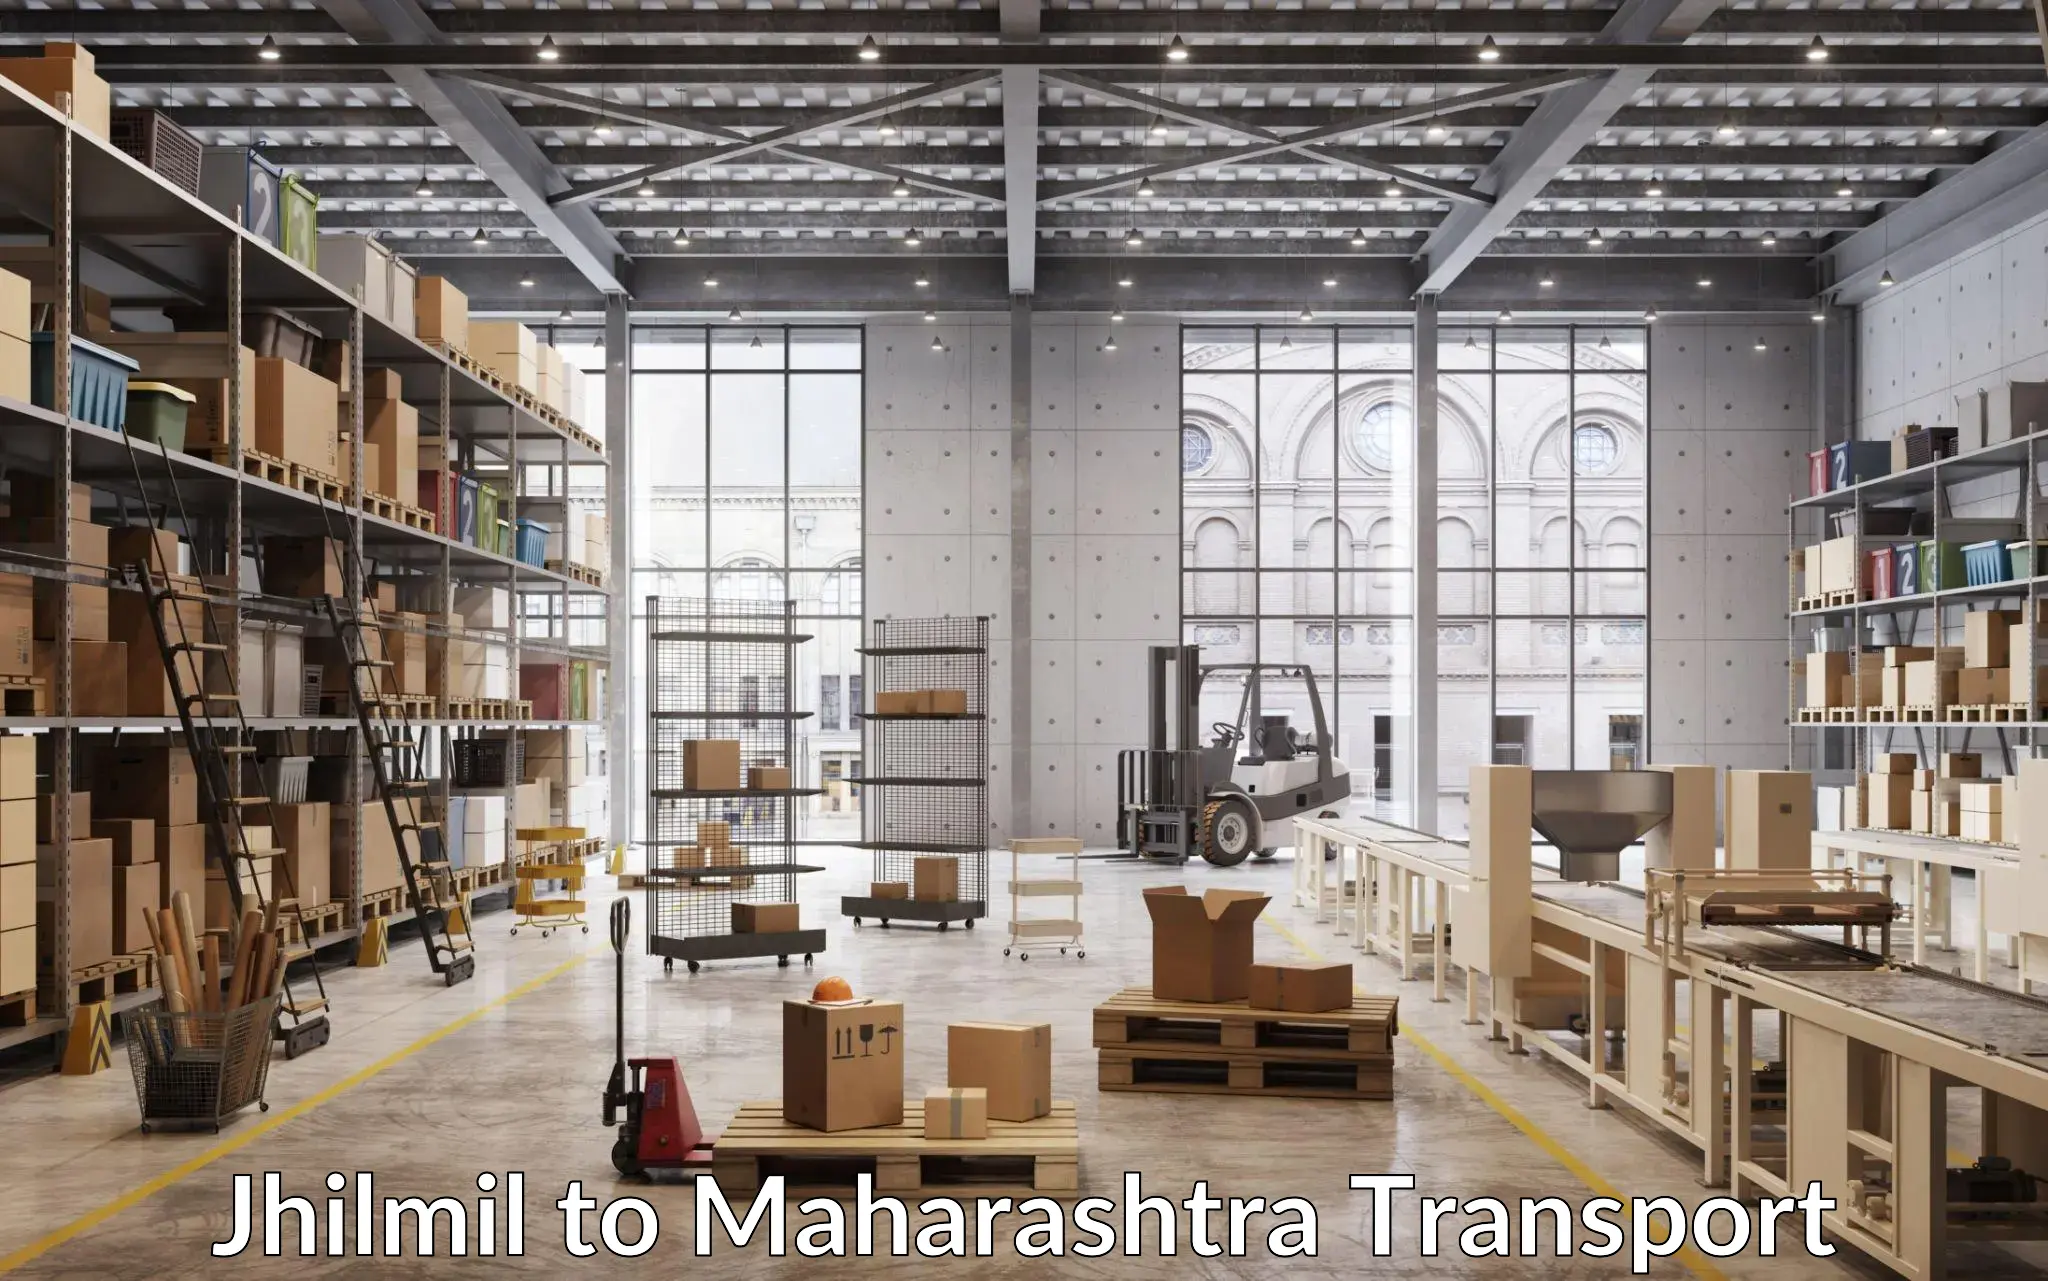 Material transport services in Jhilmil to Dadar